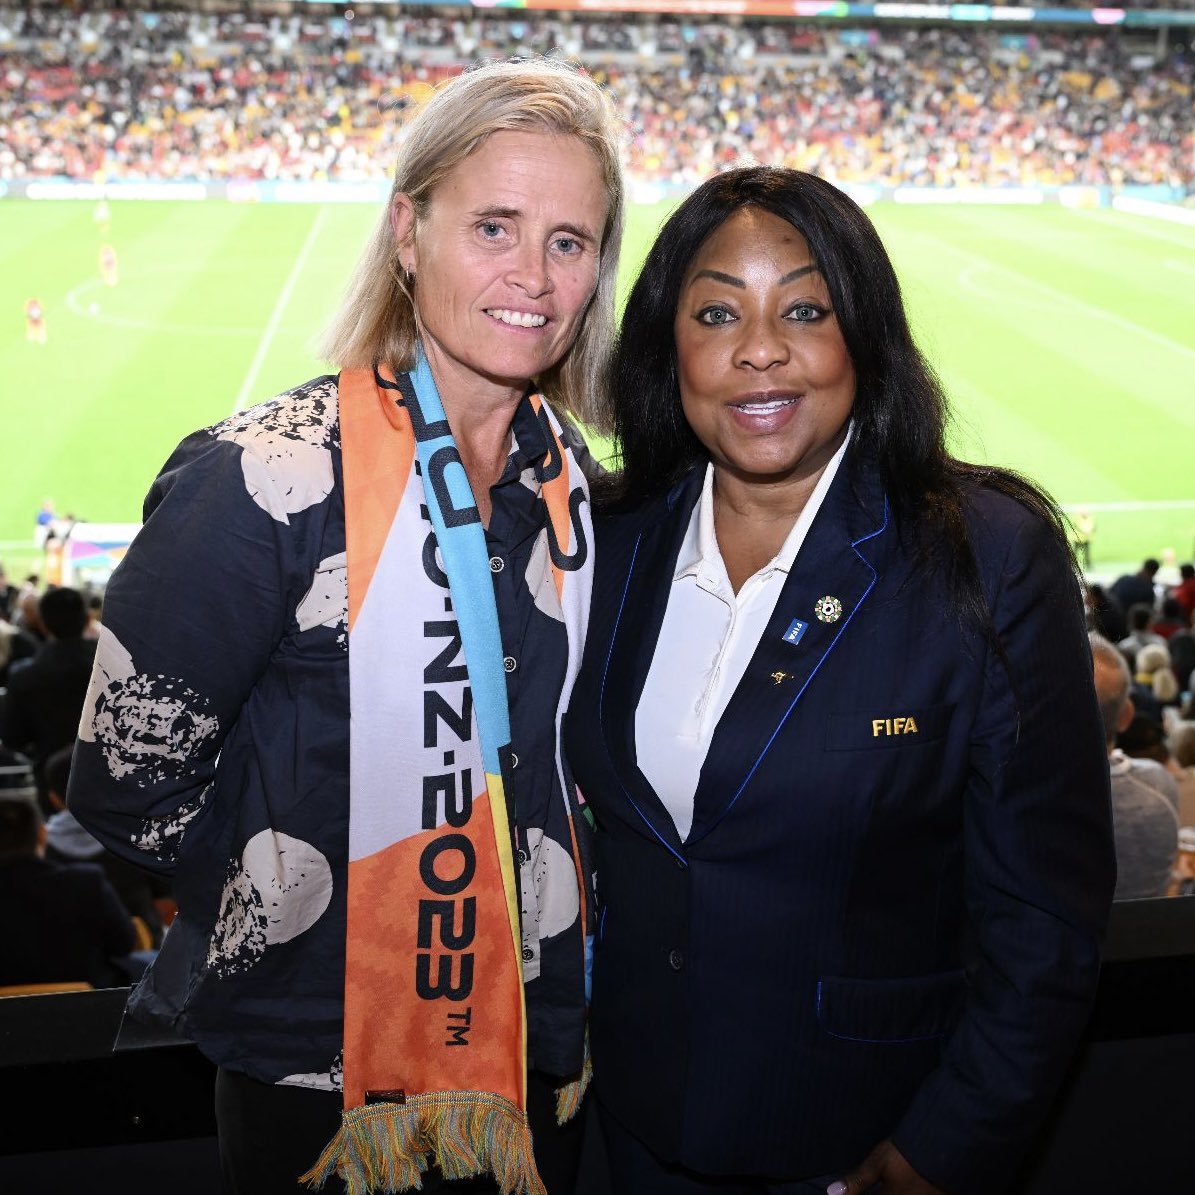 Had incredible time chatting with former Matilda Sonia Gegenhuber during the half time of 🇰🇷 v 🇩🇪 match tonight. Loved our discussions and insights on this prestigious @FIFAWWC.

#FIFAWWC #BeyondGreatness